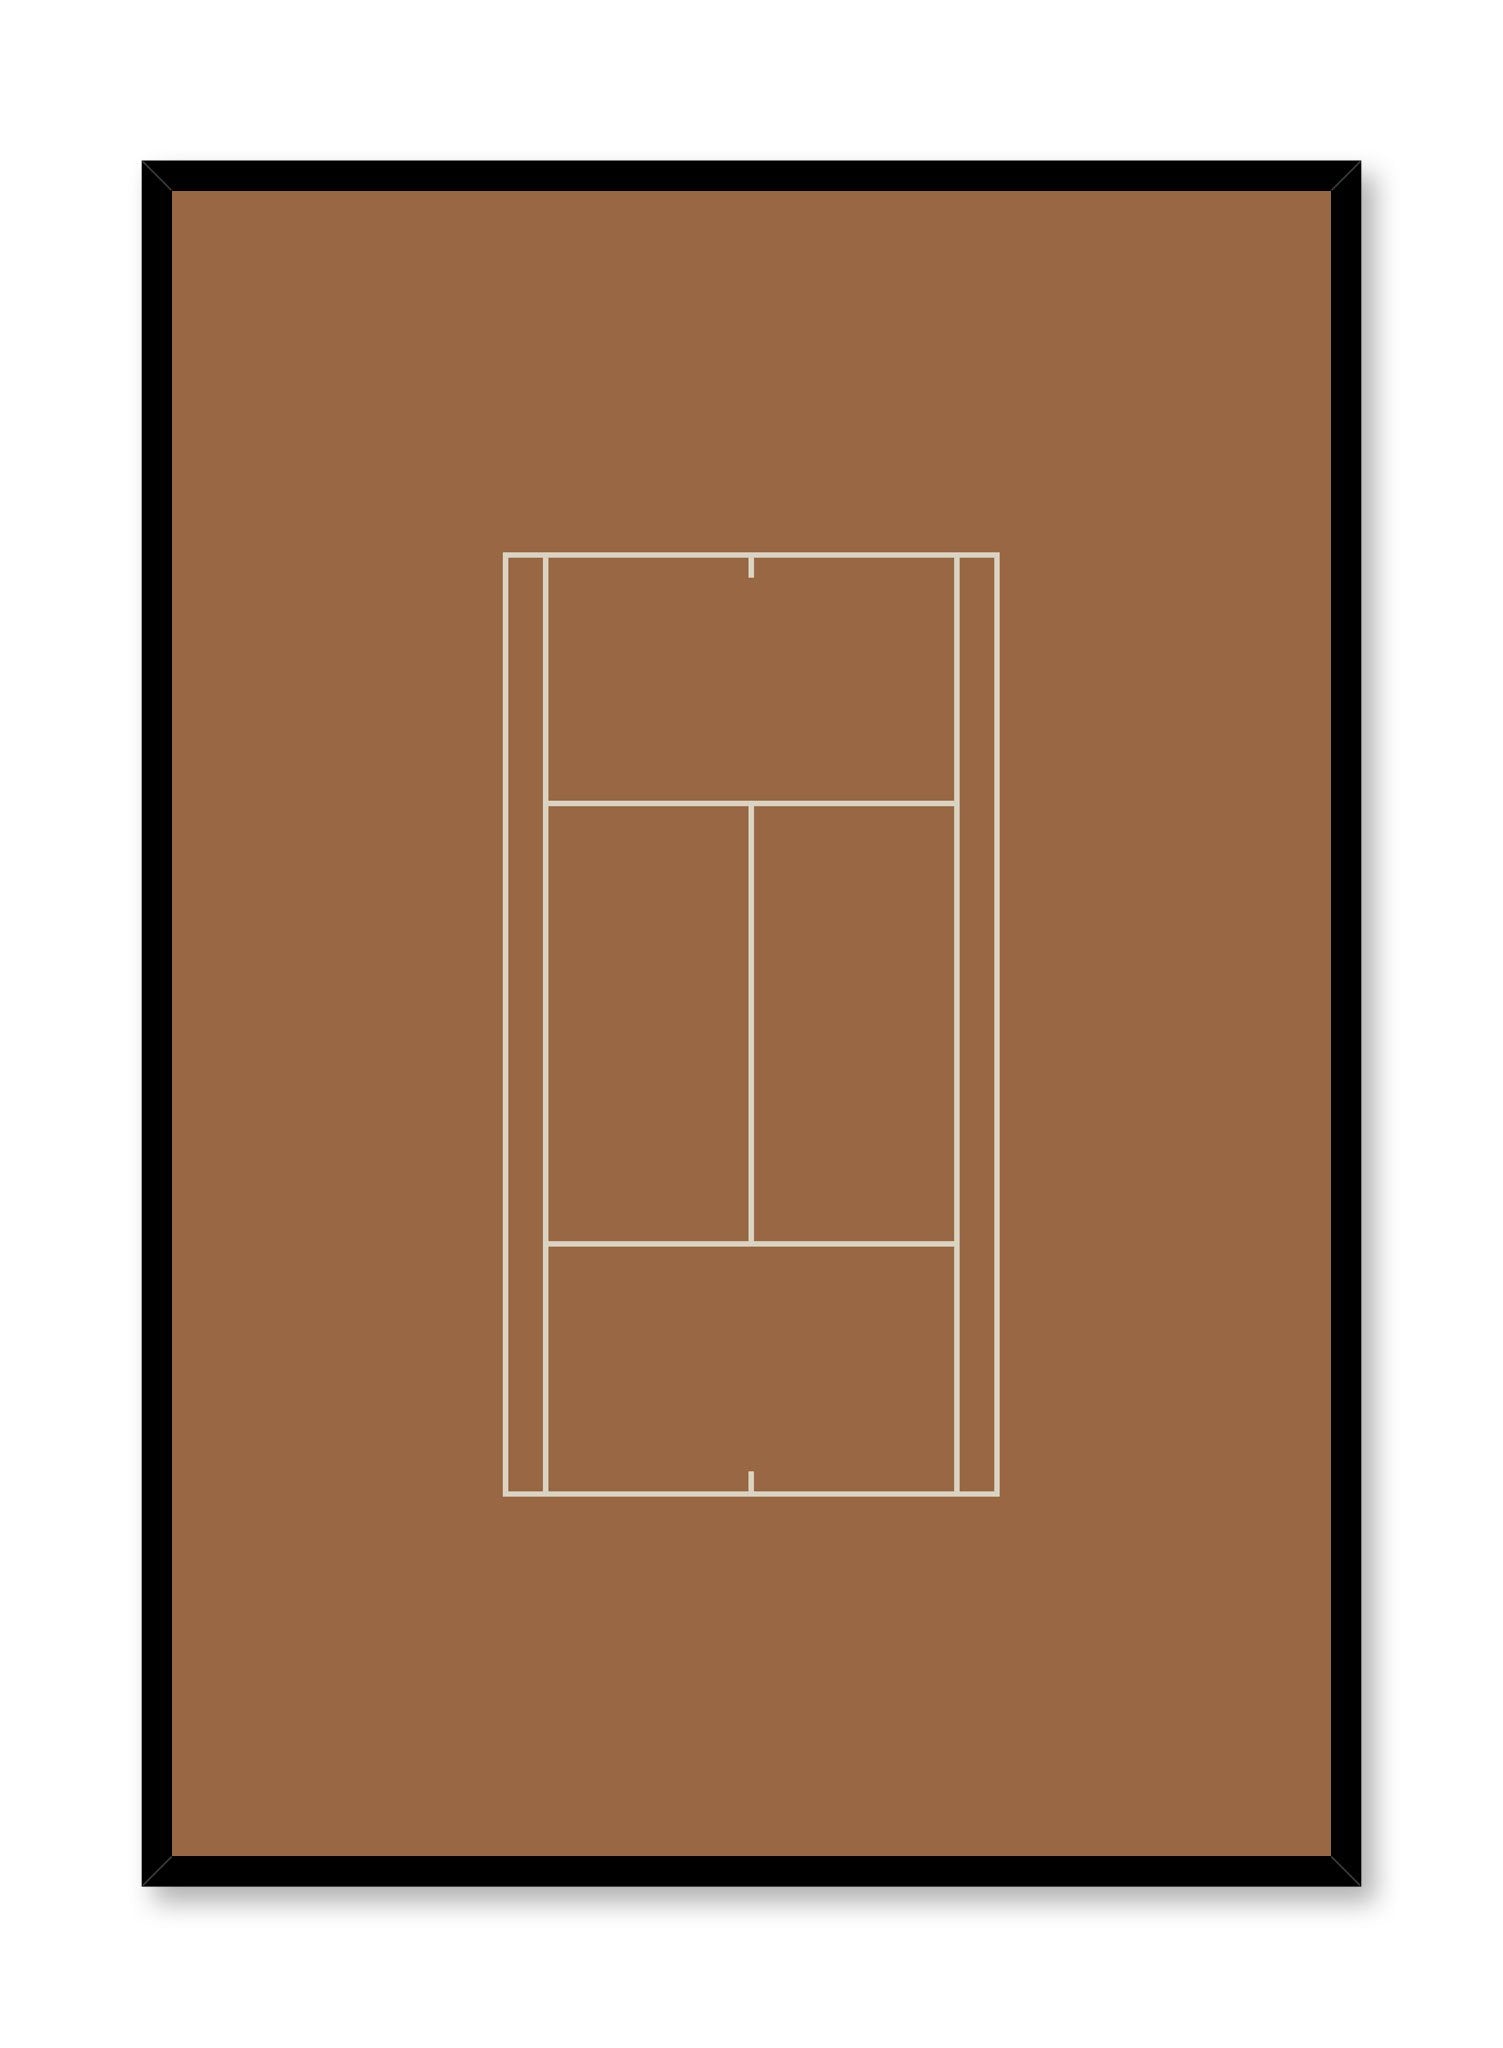 Minimalist design poster by Opposite Wall with Talk It Up Tennis Court abstract graphic design in orange